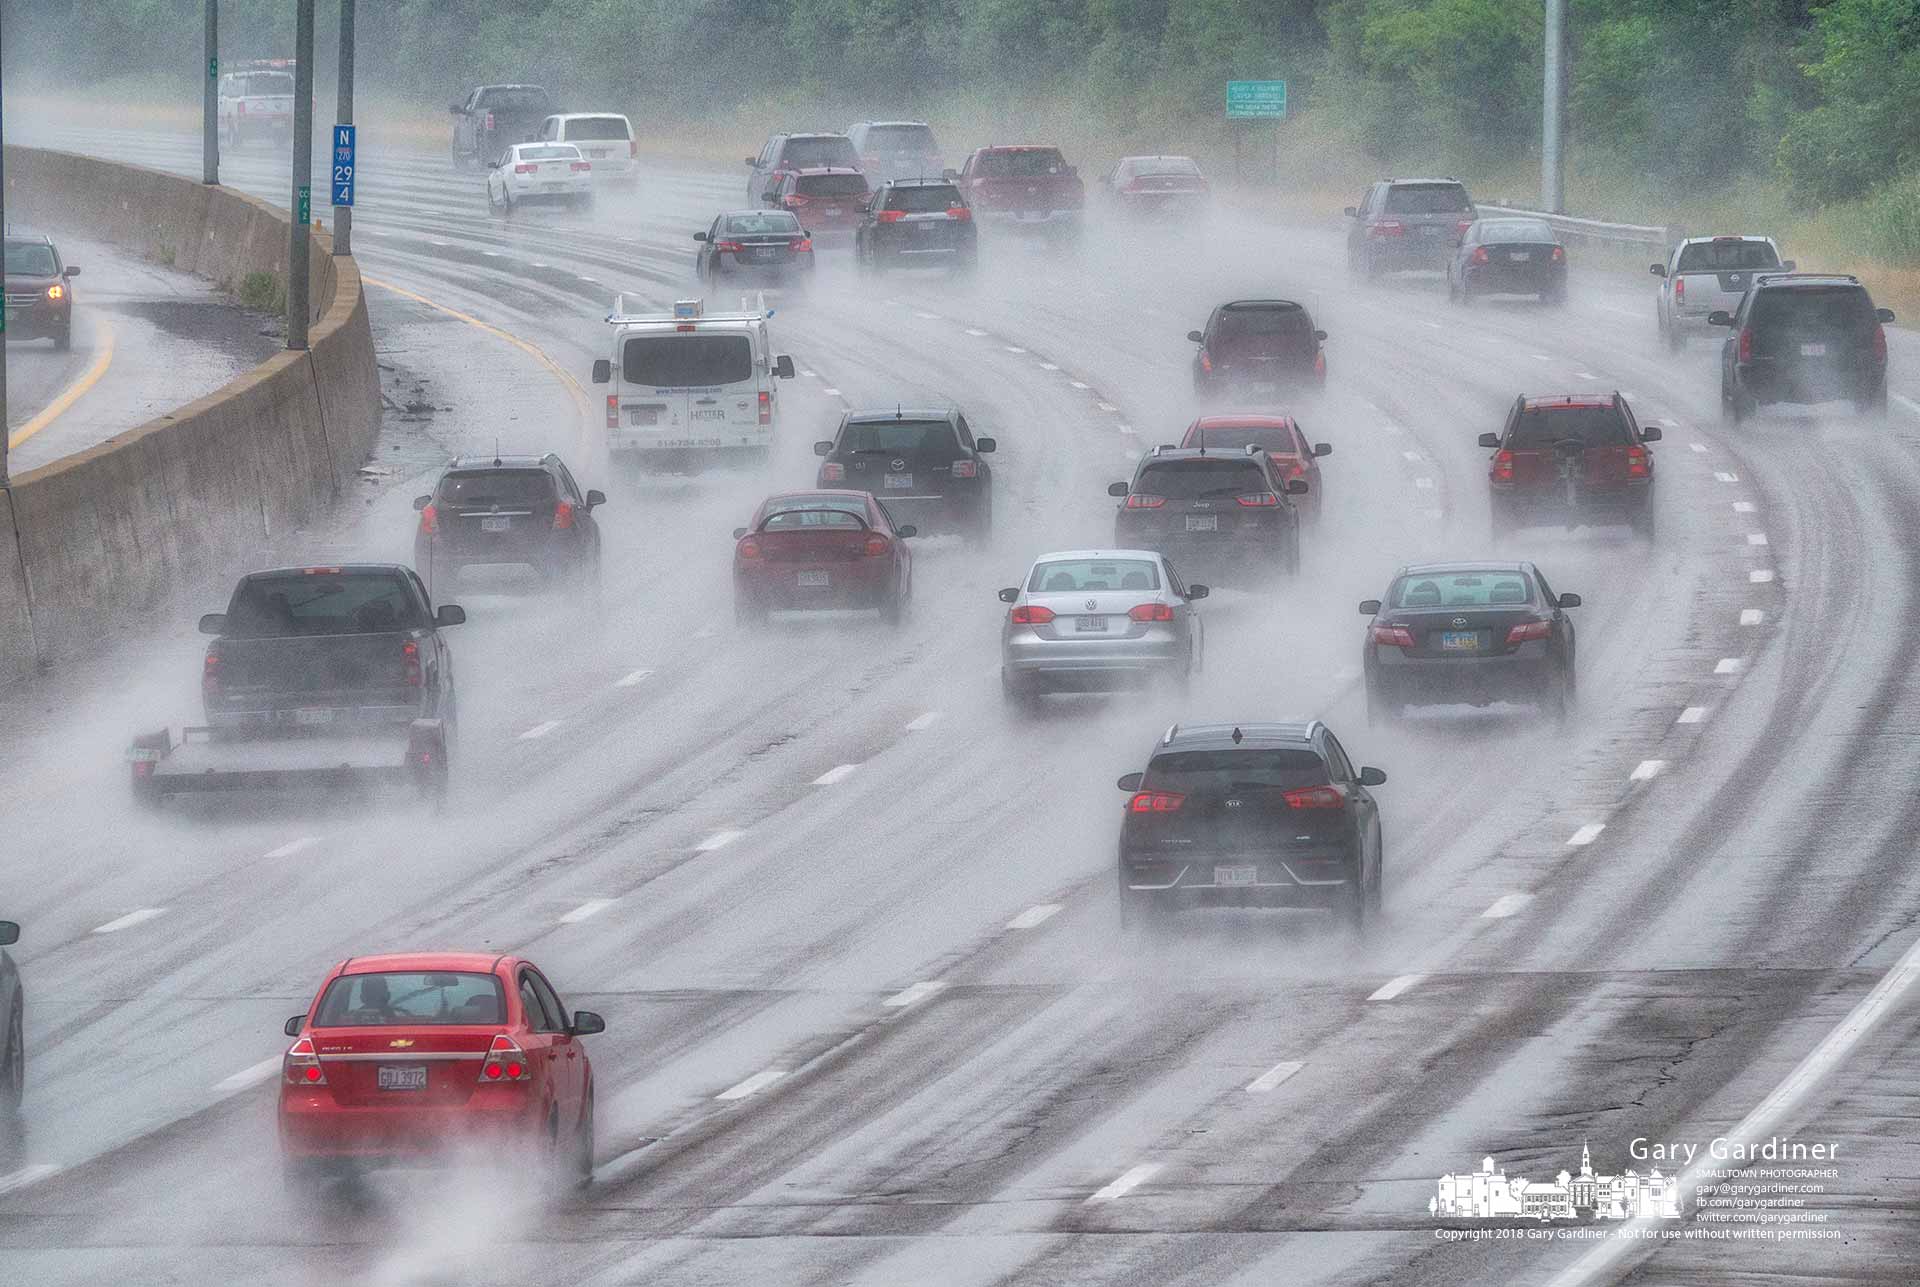 Travelers navigate their way through an afternoon rain storm as they travel along I-270 near Westerville. My Final Photo for July 20, 2018.